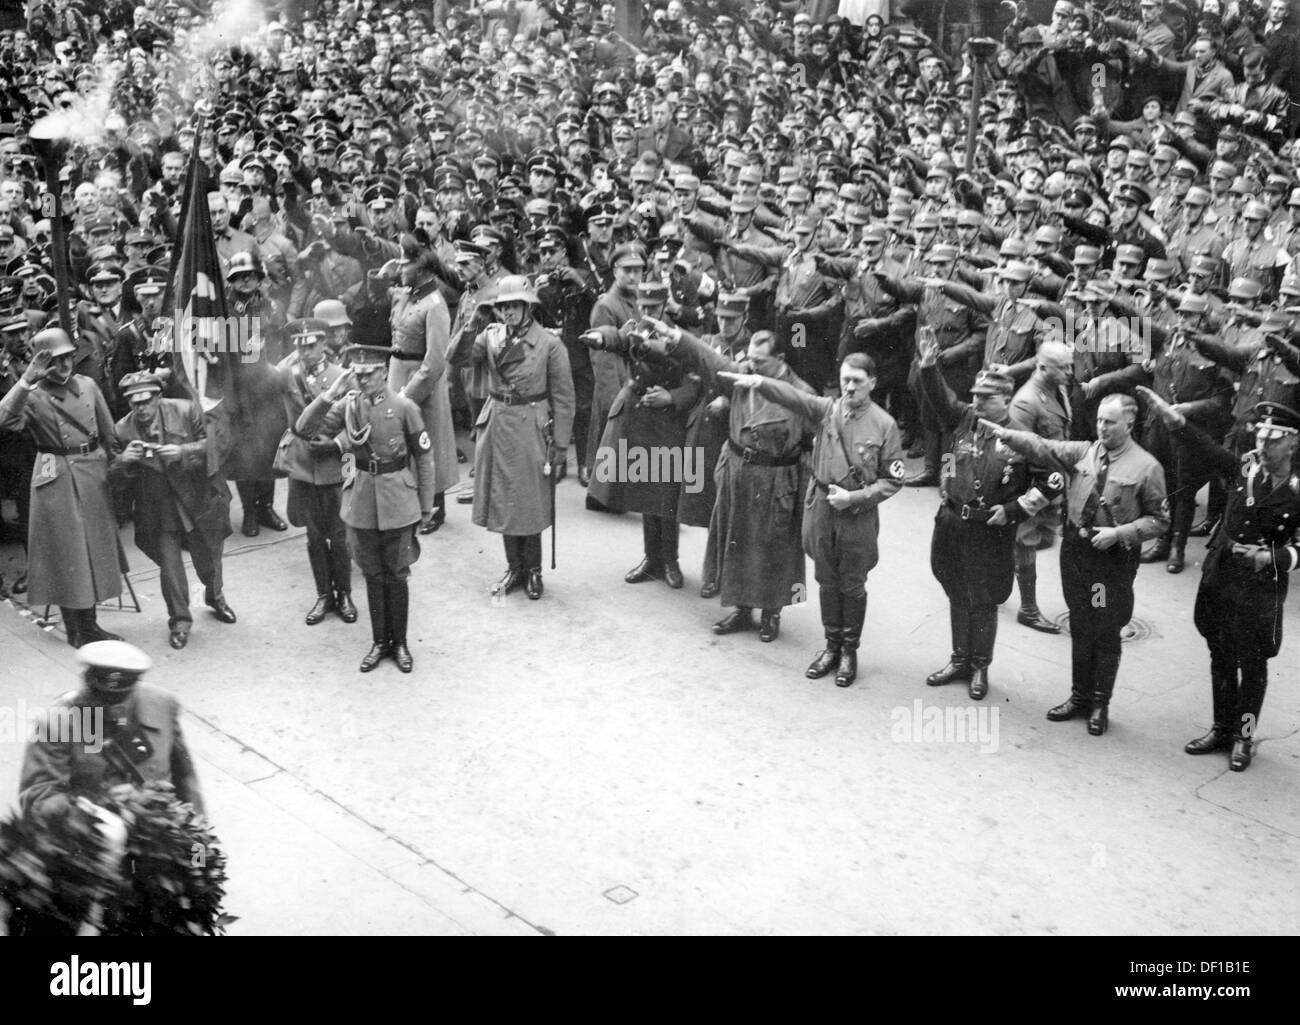 The image from the Nazi Propaganda! shows Adolf Hitler among his supporters during the consecration of the Memorial for the victims of the Beer Hall Putsch of 9 November 1923 on the Feldherrenhalle in Munich, Germany, on 9 November 1933. To Hitler's left: Hermann Göring. To the very right, Reichsführer SS Heinrich HImmler. Fotoarchiv für Zeitgeschichte Stock Photo